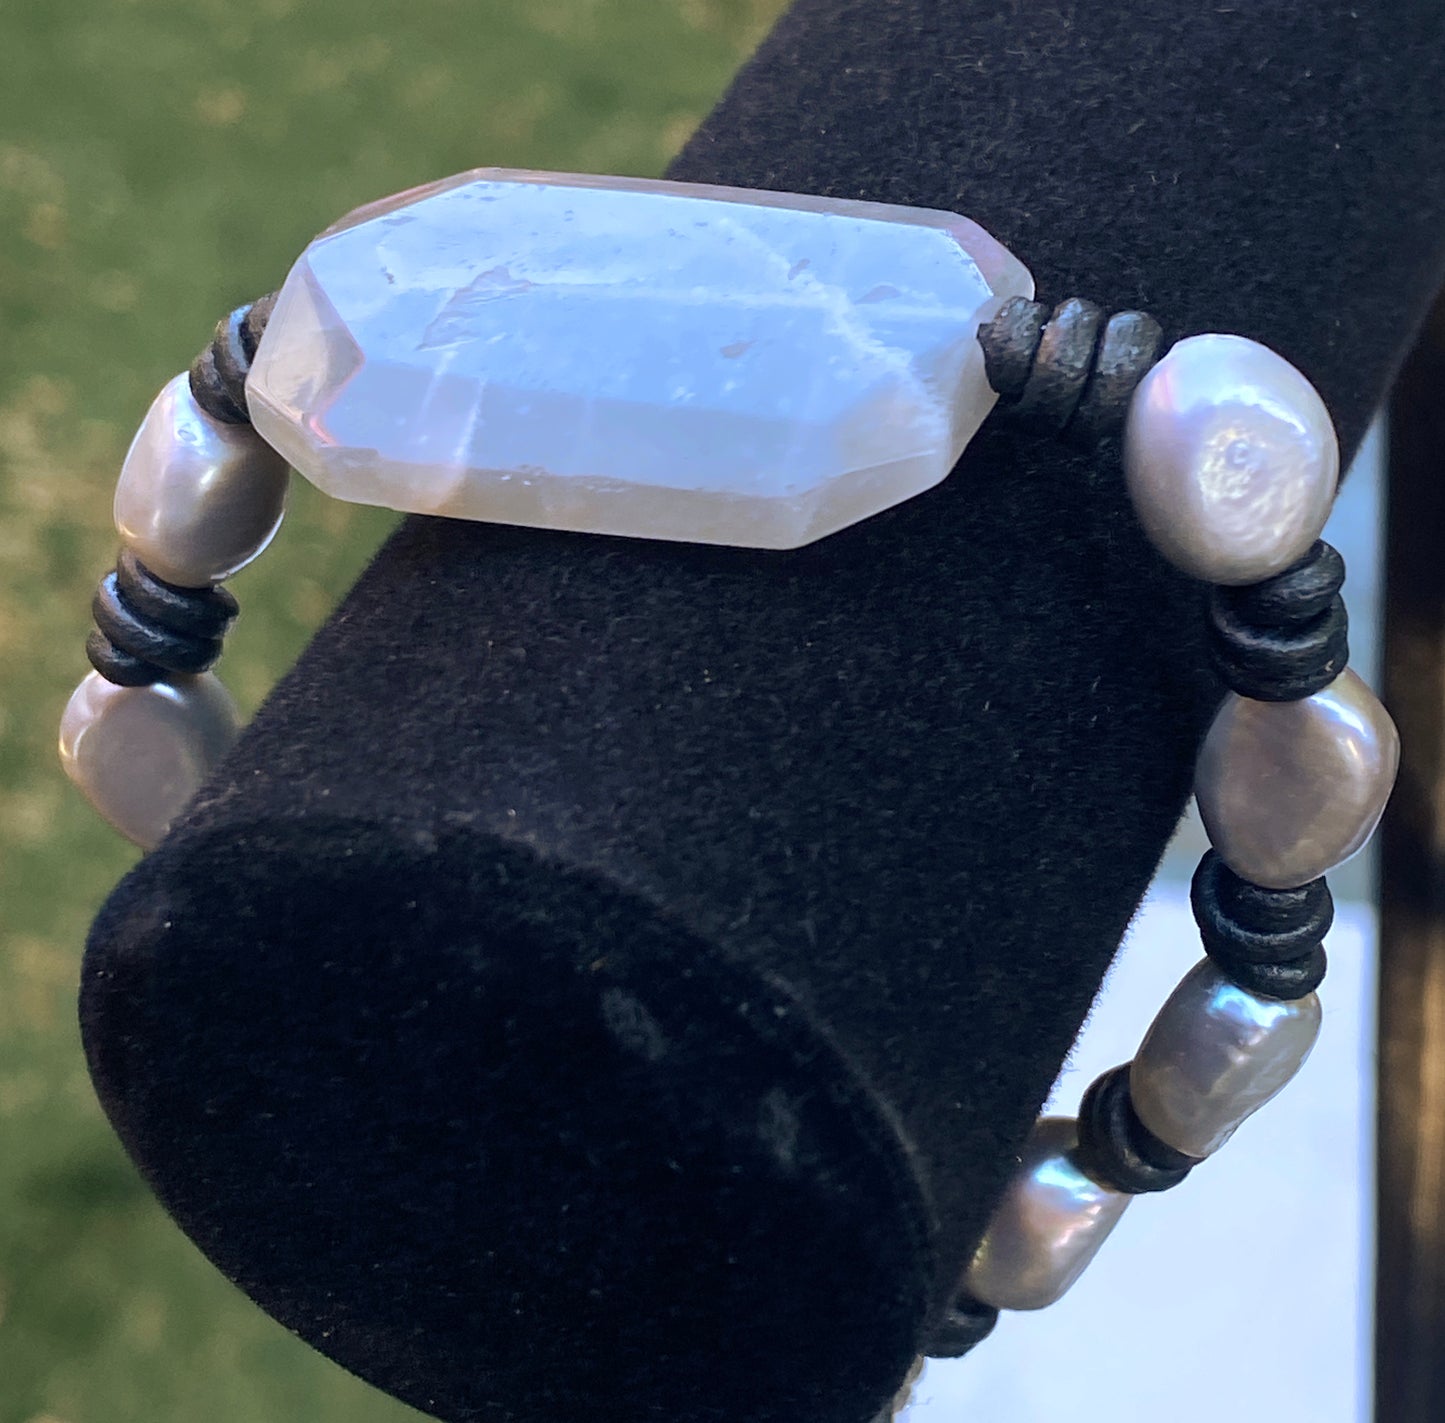 Silver moonstone and genuine freshwater Pearl hand knotted leather bracelet